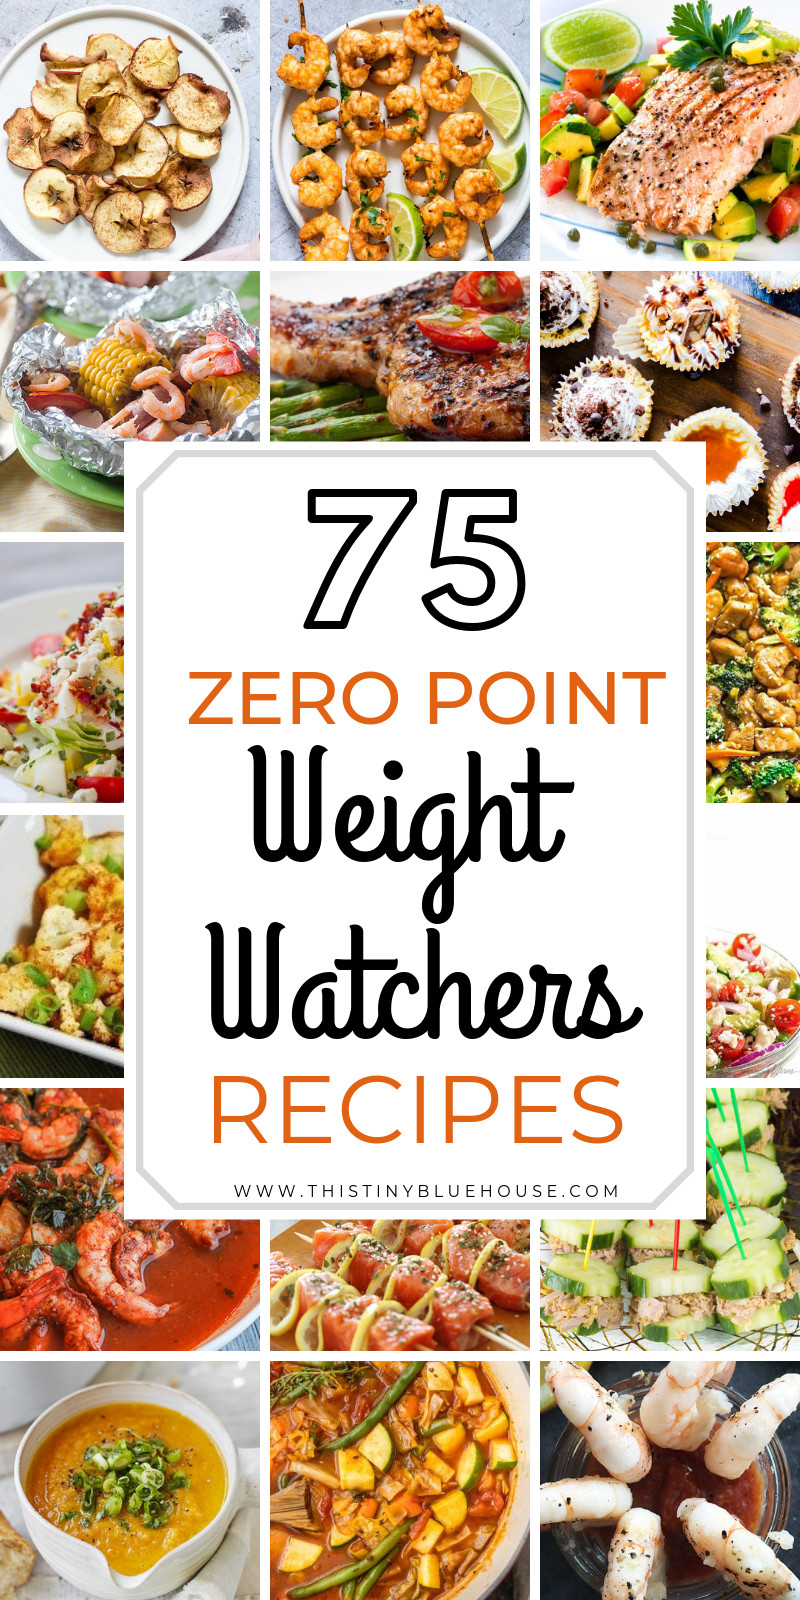 Weight Watcher Snacks Recipes
 75 Zero Point Weight Watchers Food Ideas This Tiny Blue